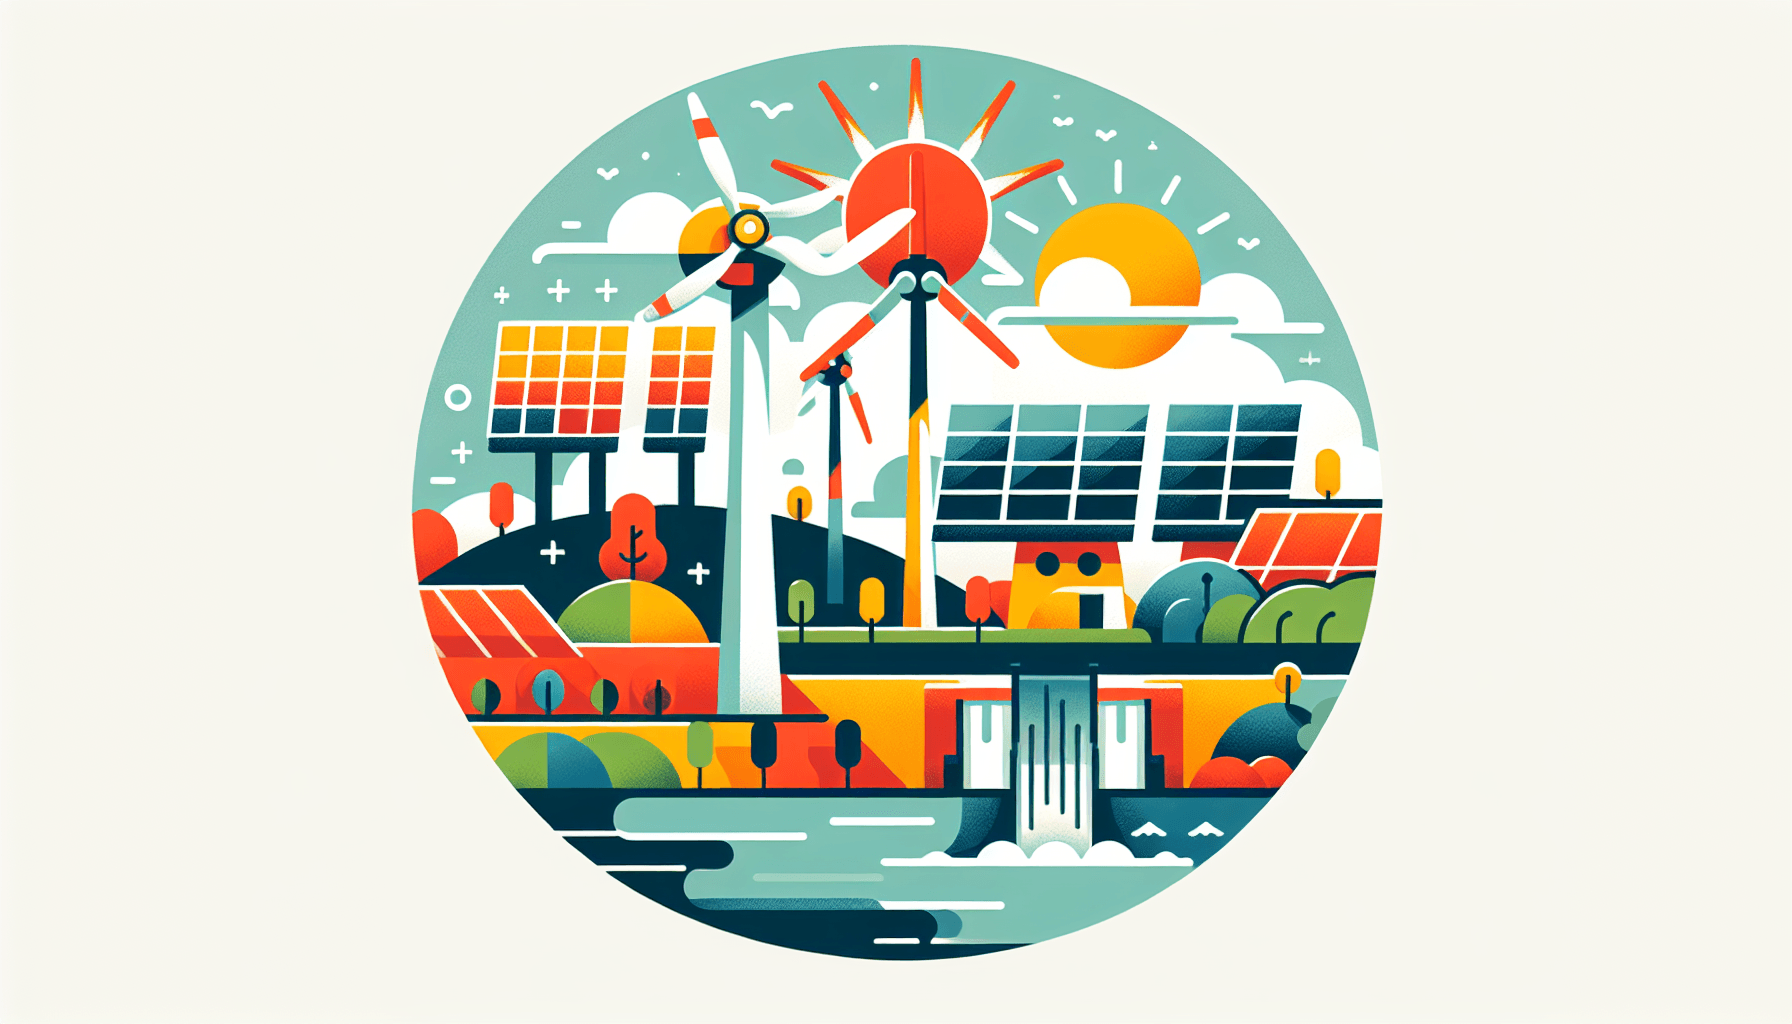 Renewable energy in flat illustration style and white background, red #f47574, green #88c7a8, yellow #fcc44b, and blue #645bc8 colors.